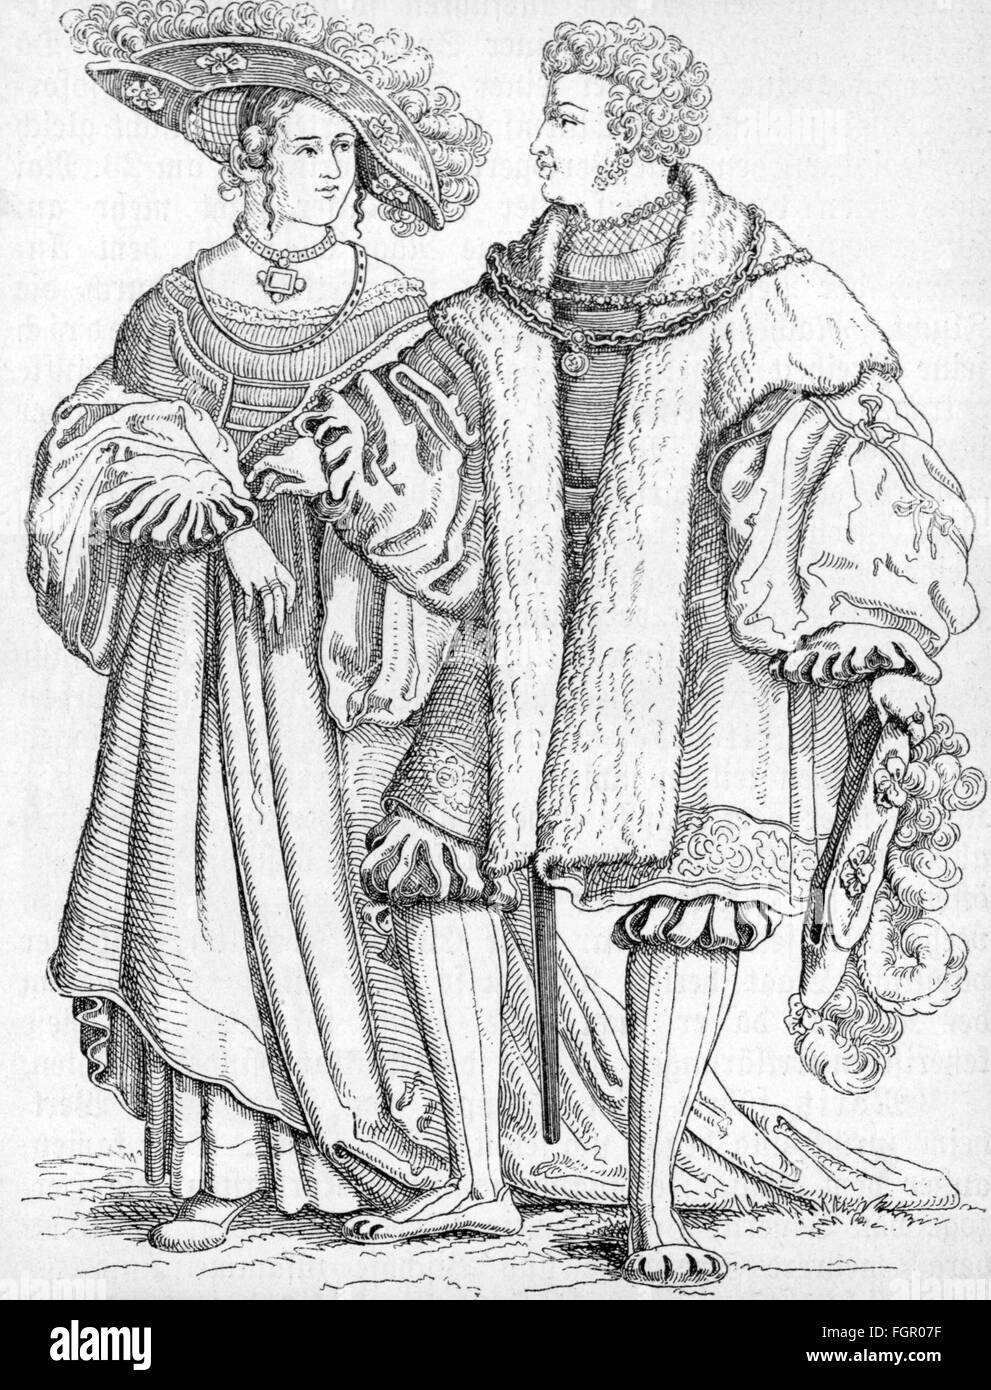 fashion, 16th century, Germany, patricians, woodcut by Hans Schaeufelin, 1520 / 1530, Additional-Rights-Clearences-Not Available Stock Photo